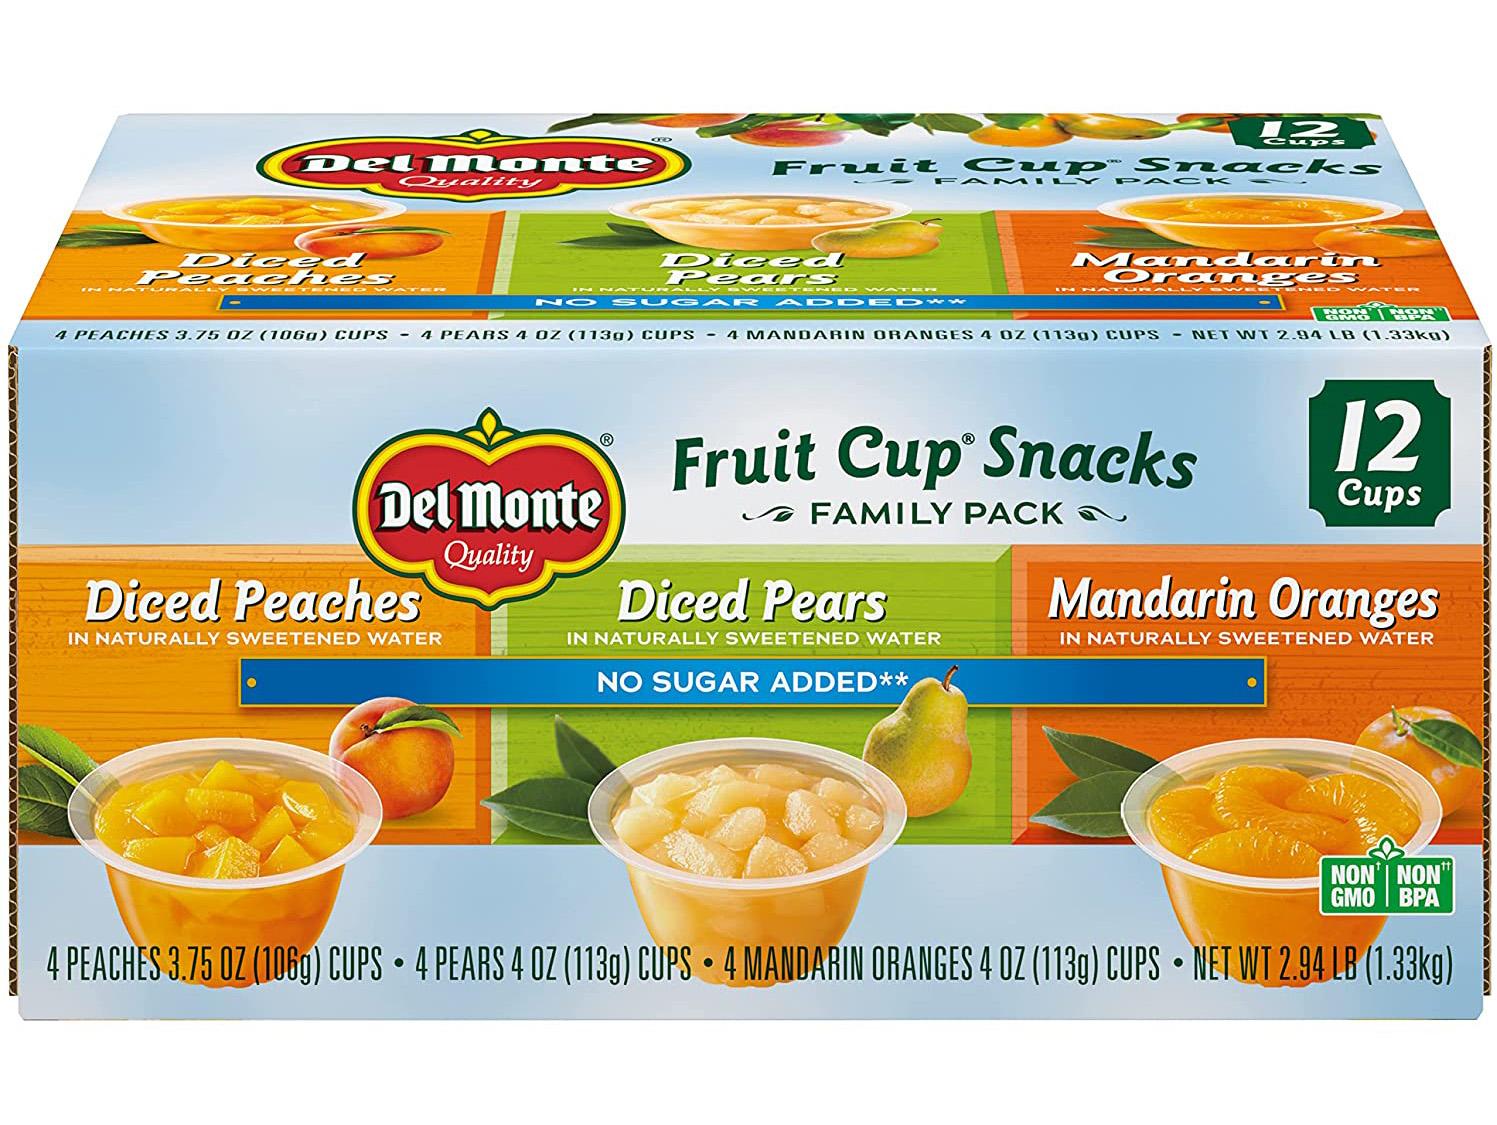 12 Del Monte No Sugar Added Fruit Cups for $4.83 Shipped